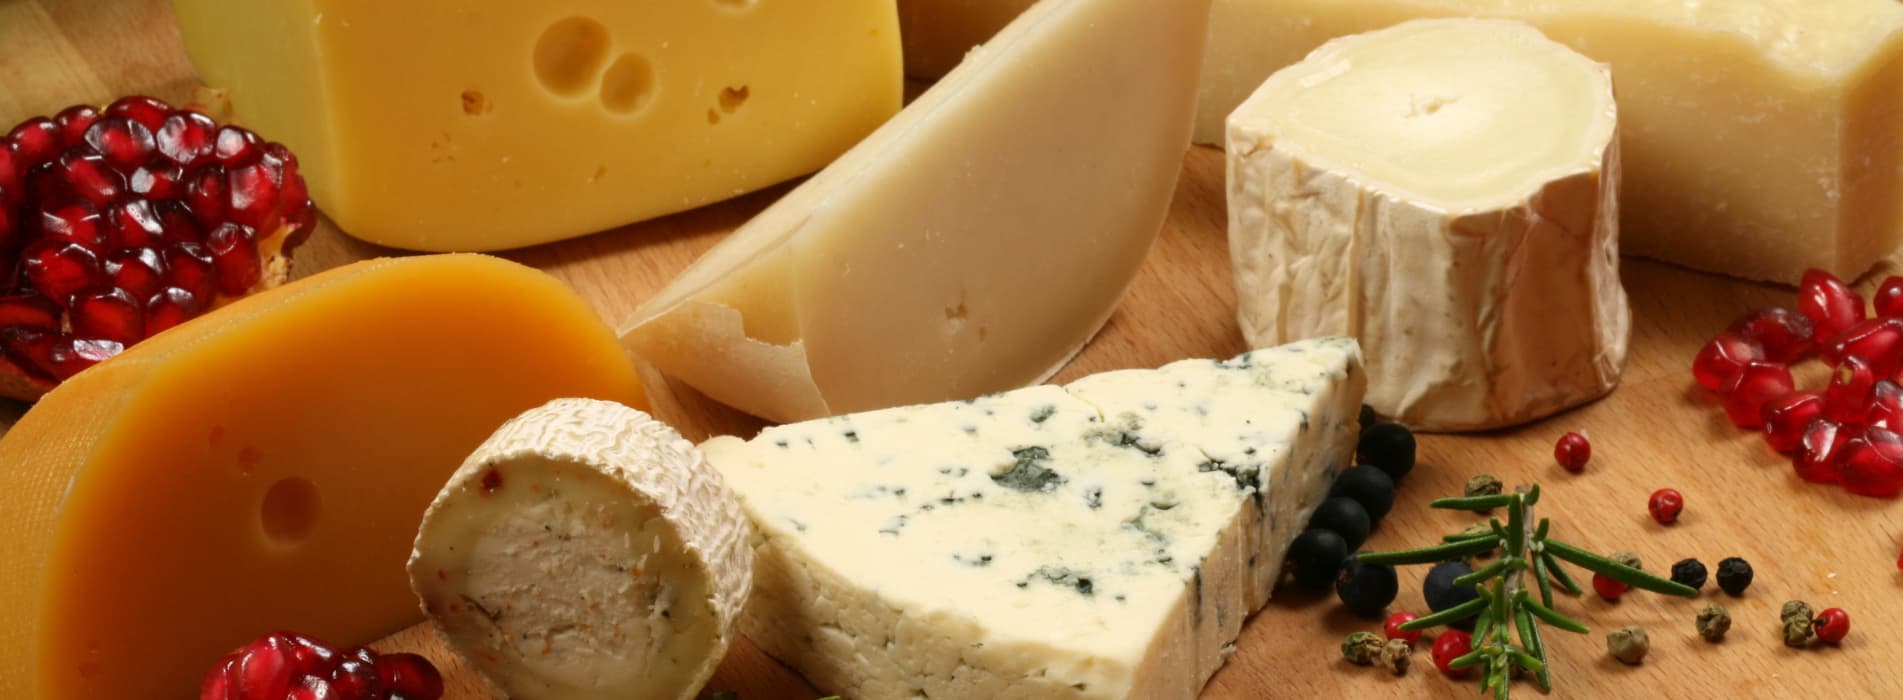 Cheese Not Good For Weight Loss